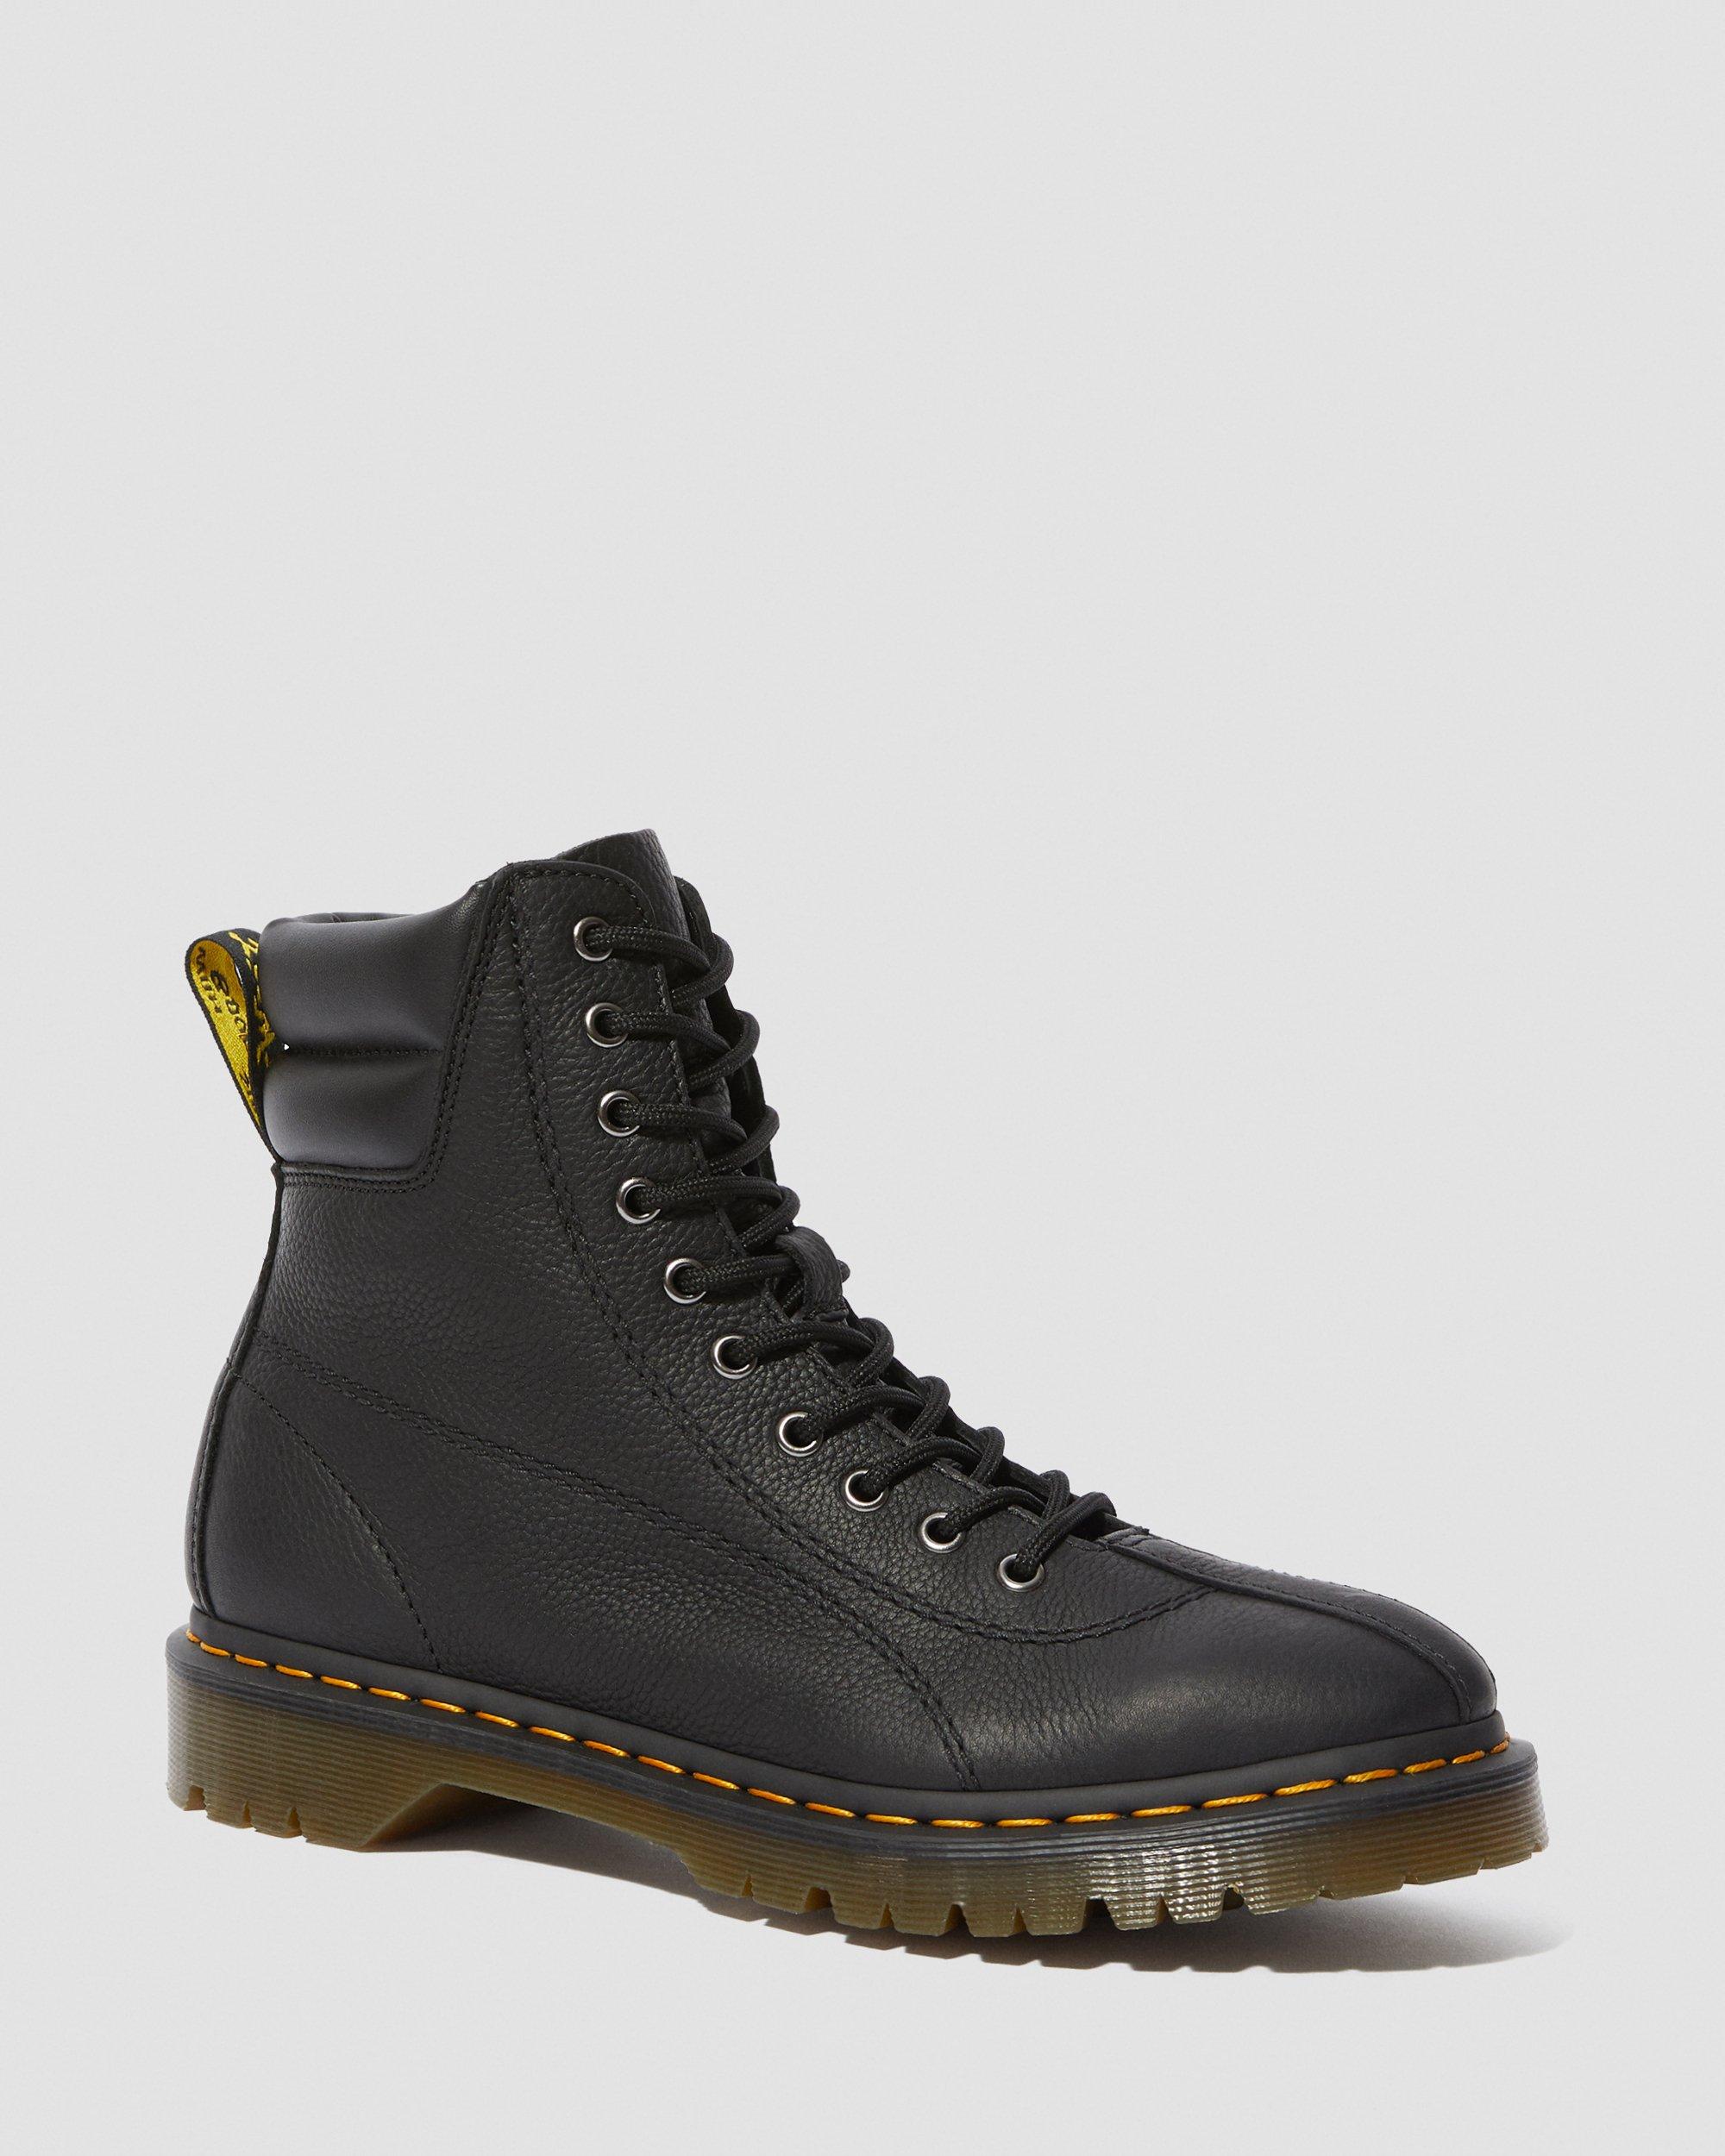 SANTO LEATHER PADDED COLLAR BOOTS | Dr. Martens